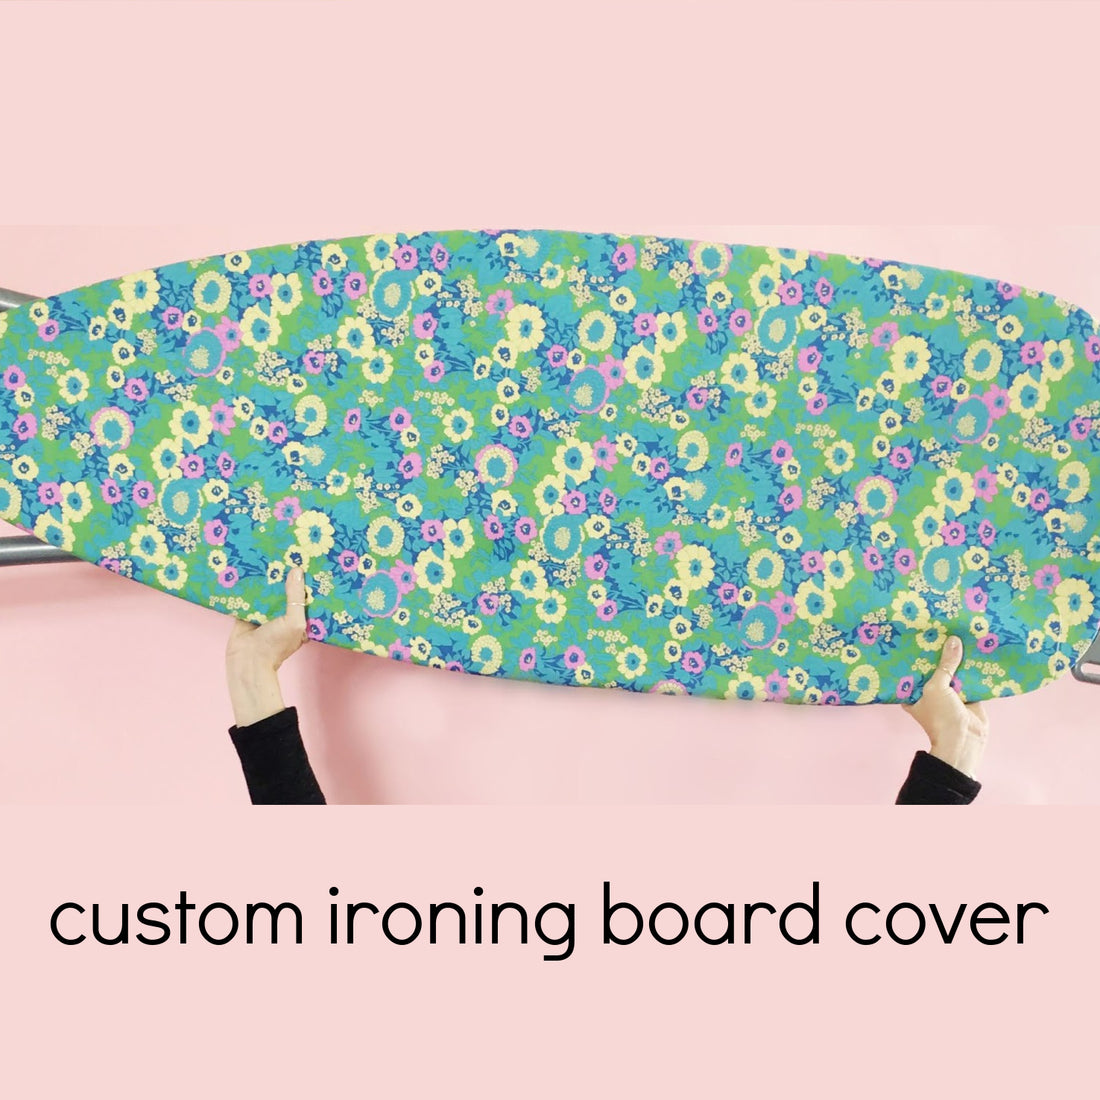 How to sew a new ironing board cover